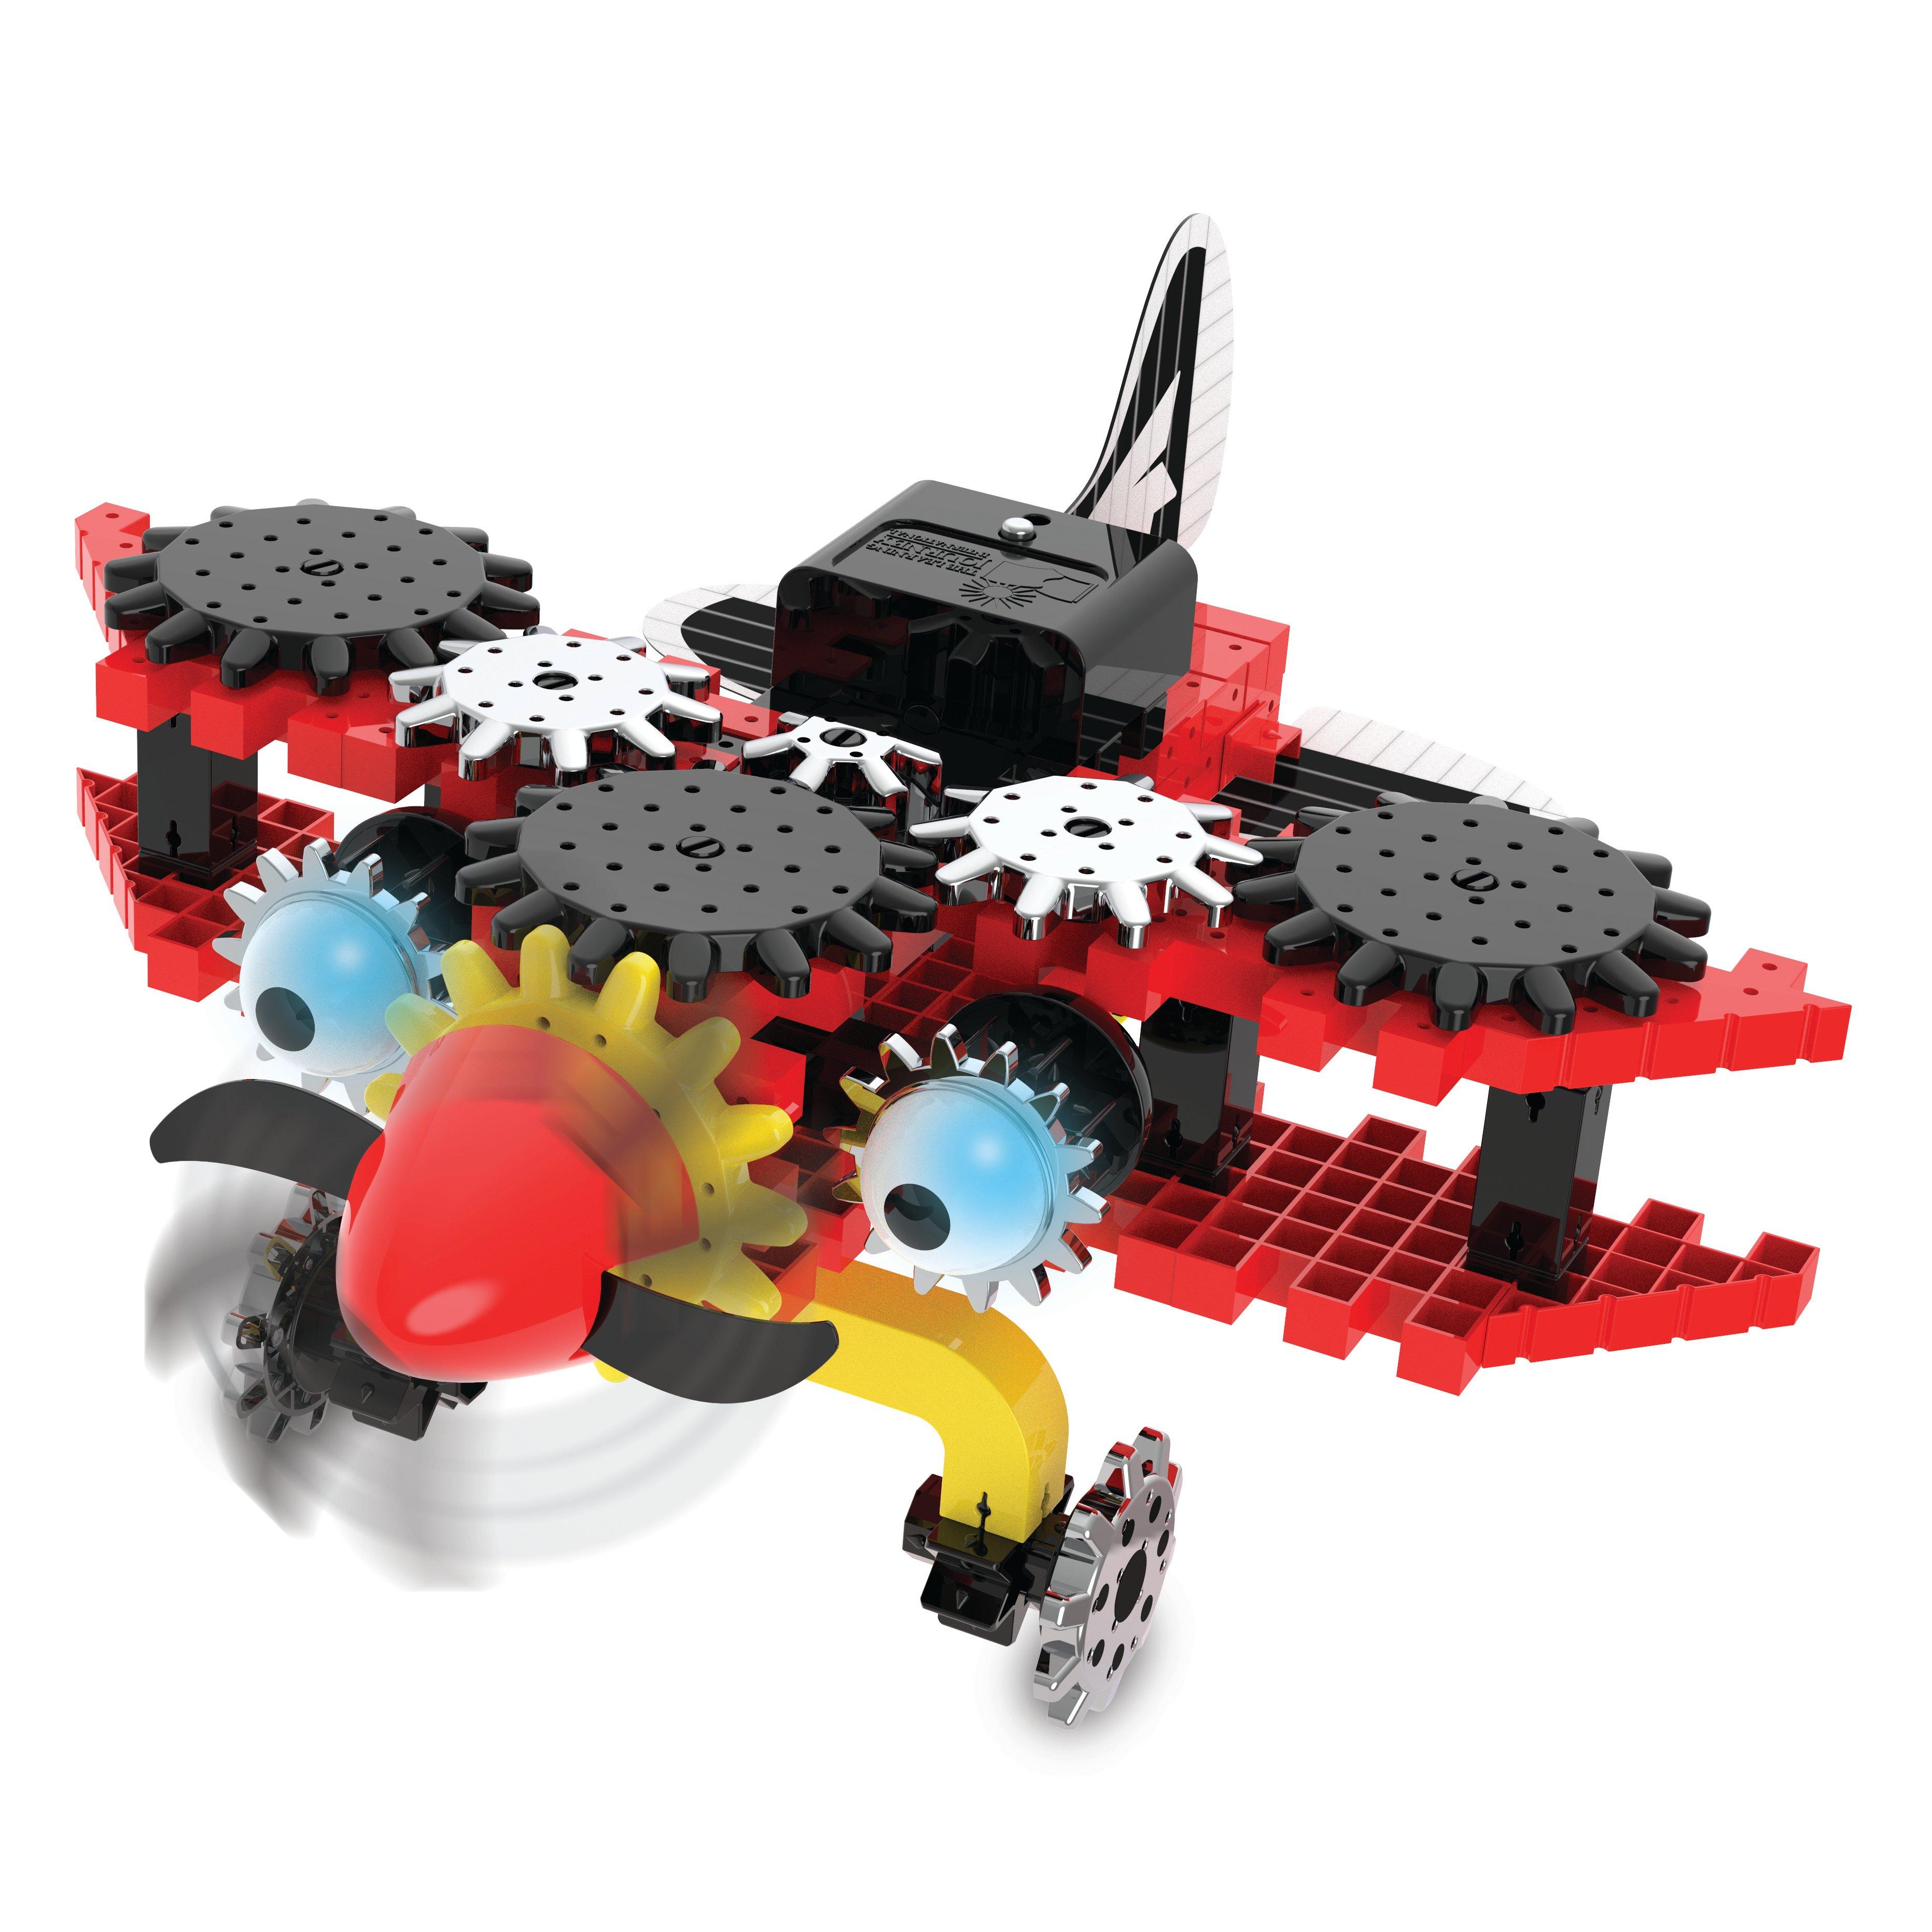 list item 1 of 2 The Learning Journey Techno Gears Bionic Biplane